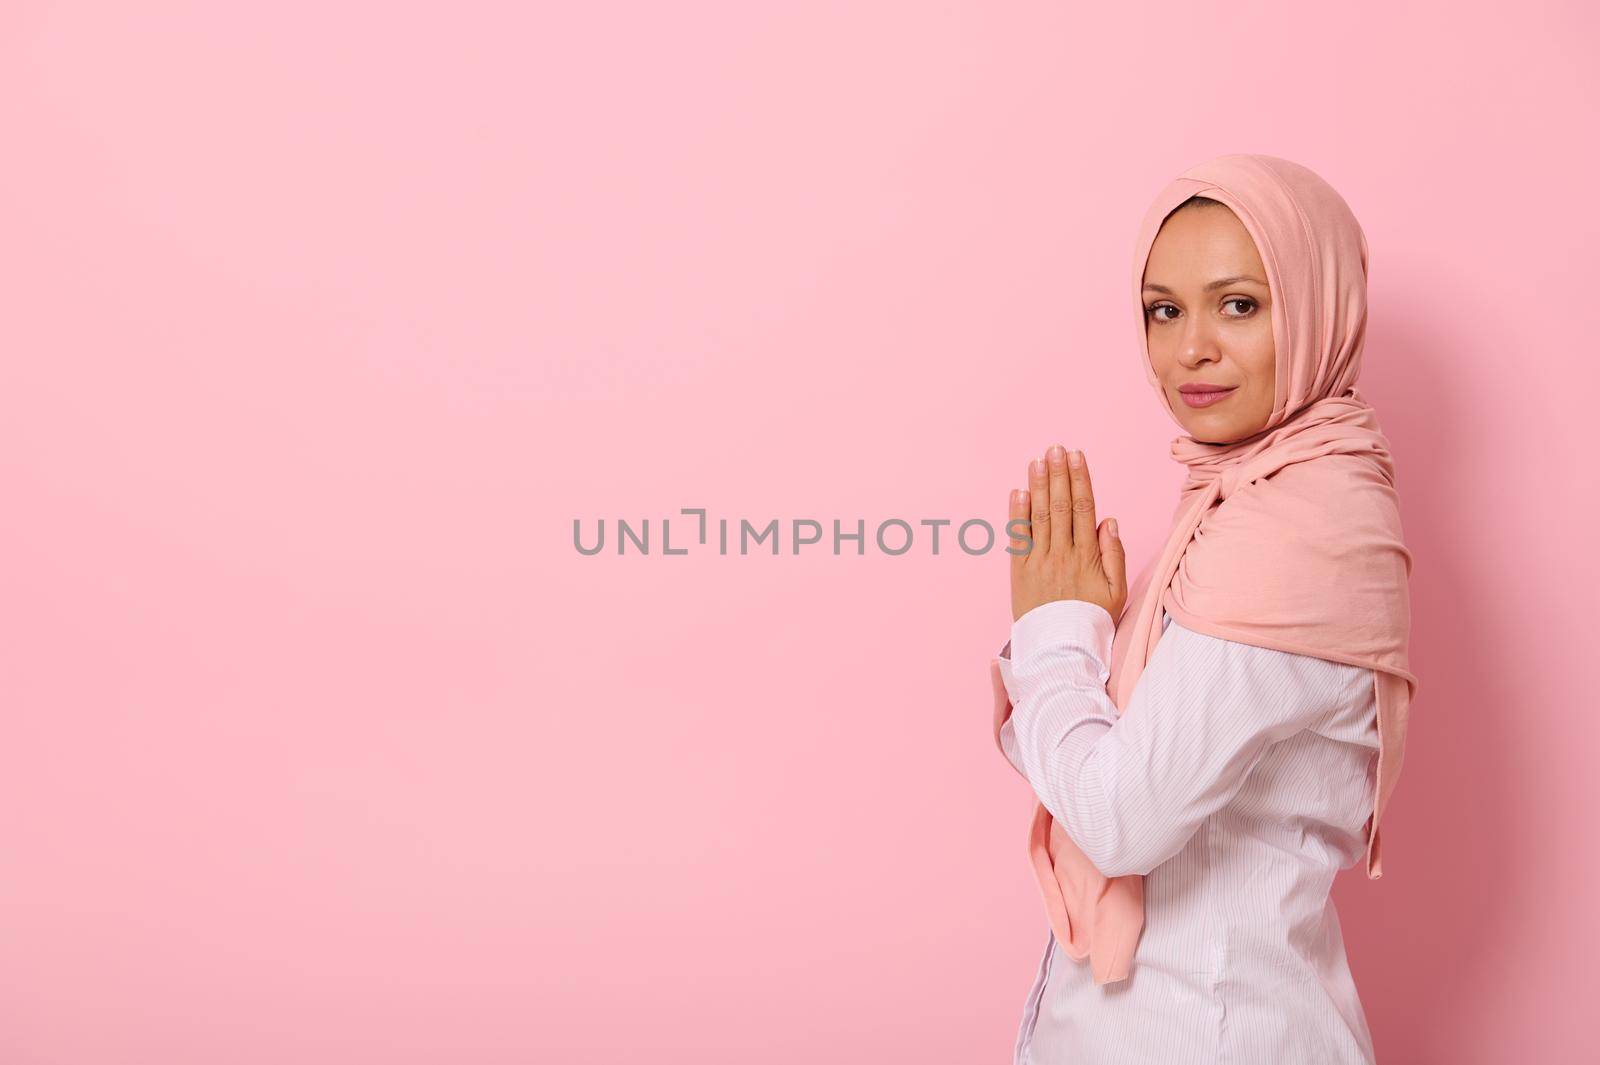 Muslim Arab woman in pink hijab and strict outfit with palms folded together at chest level praying, performing namaz, looking confidently at camera, isolated on colored background with copy space